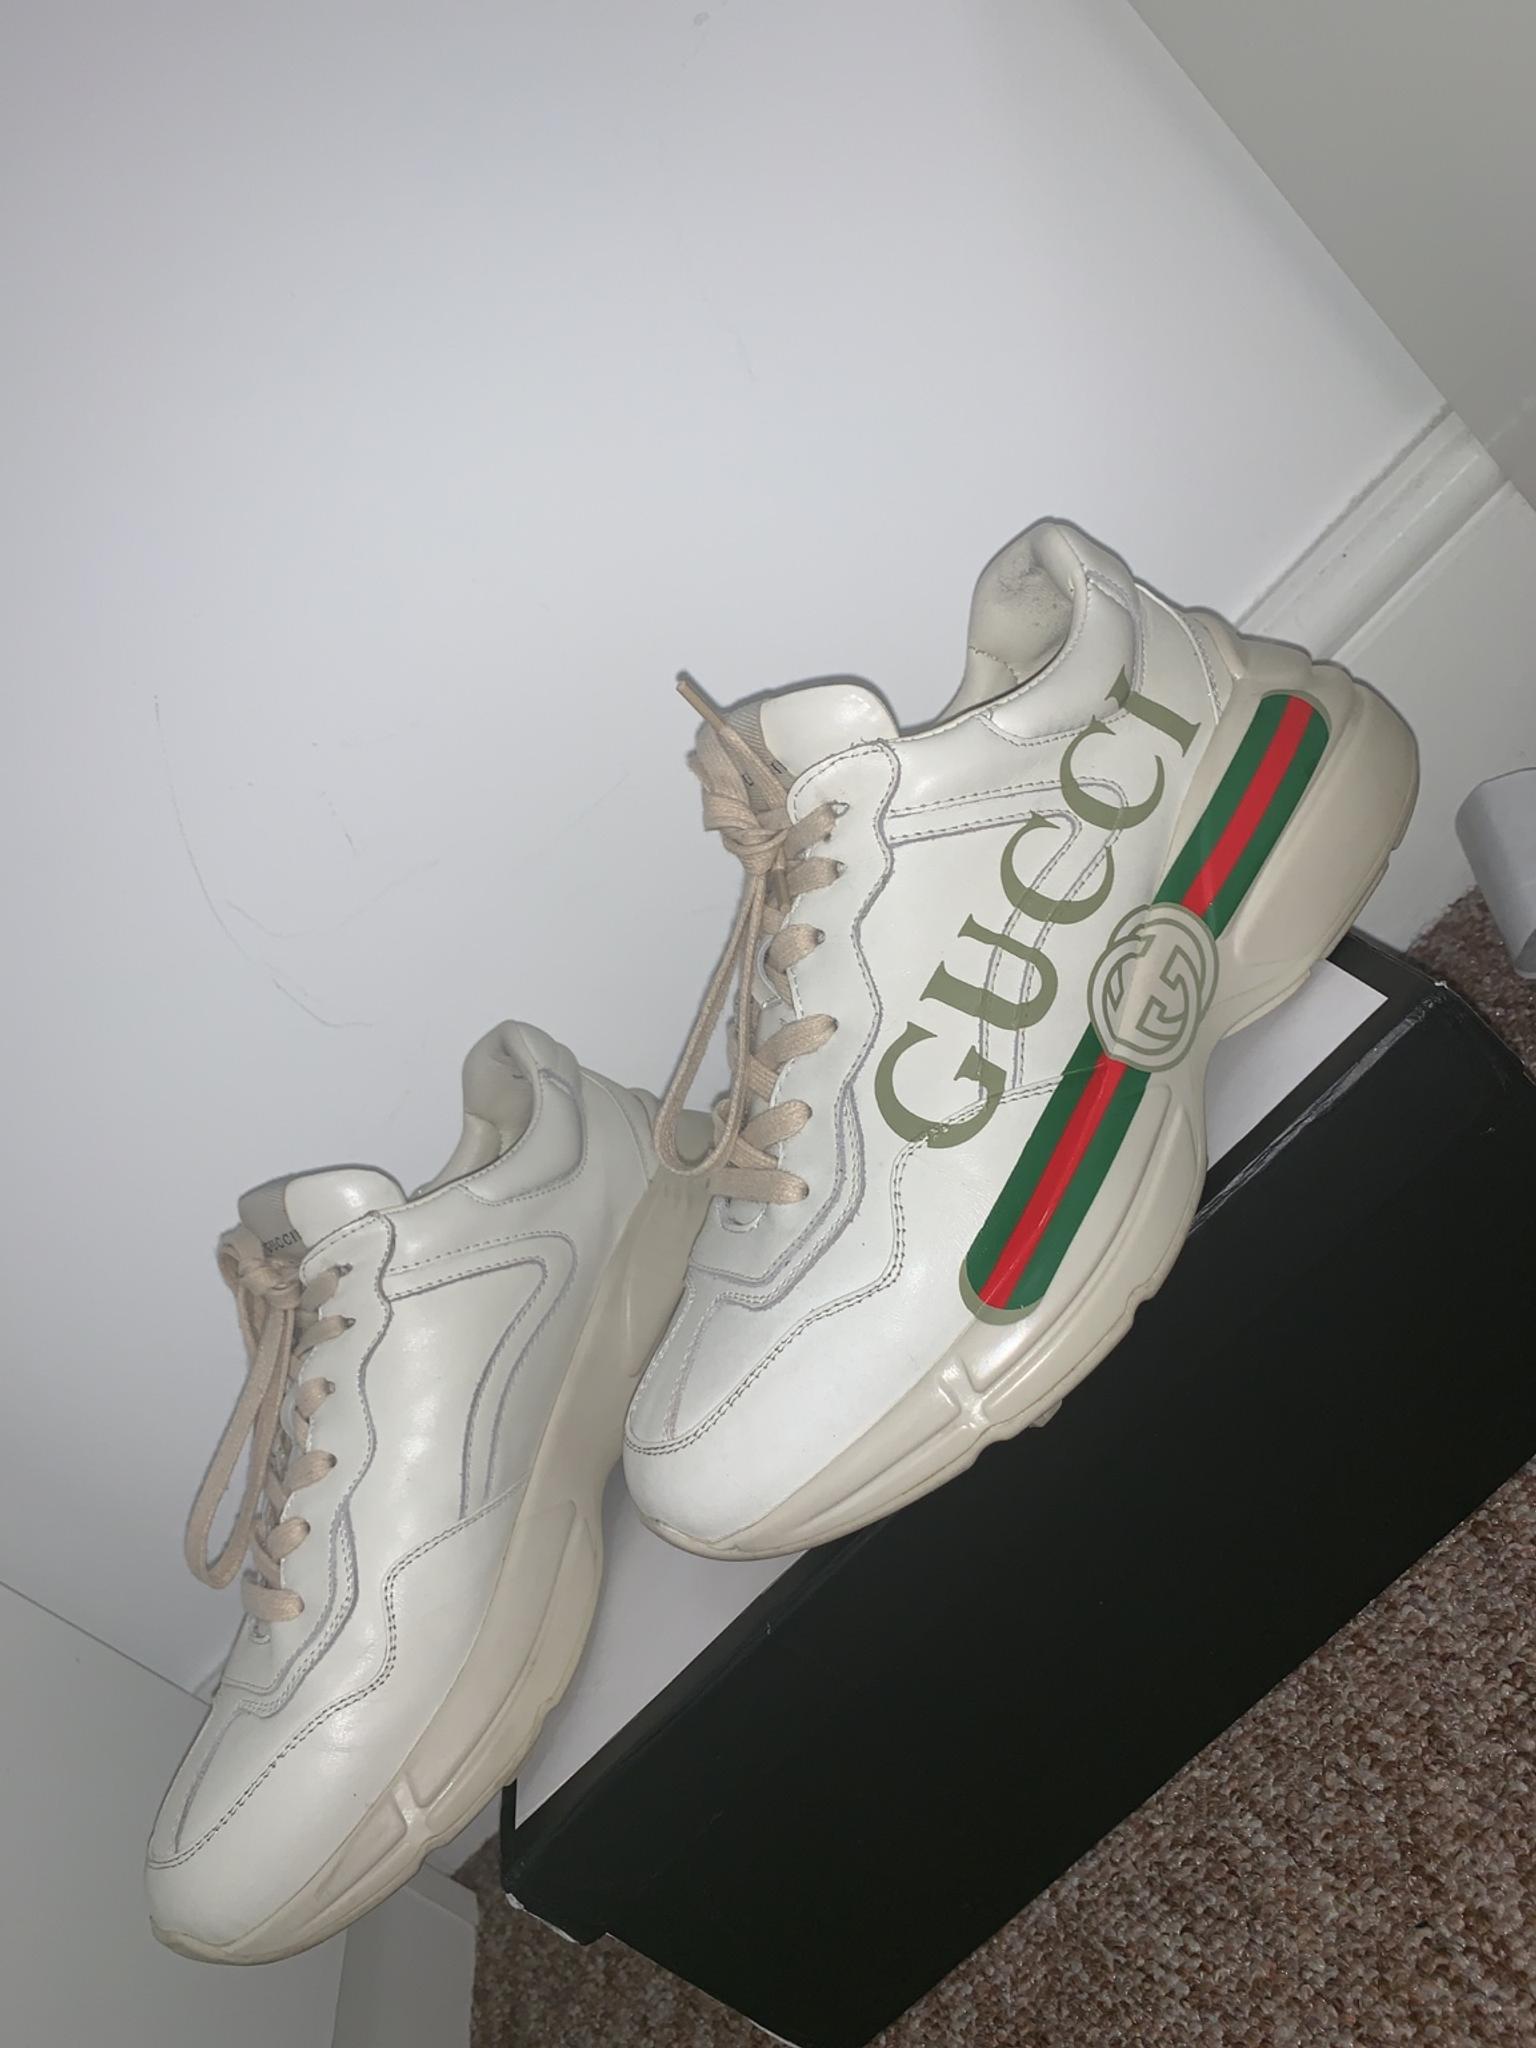 Gucci Rhyton Sneakers in NW2 Brent for 